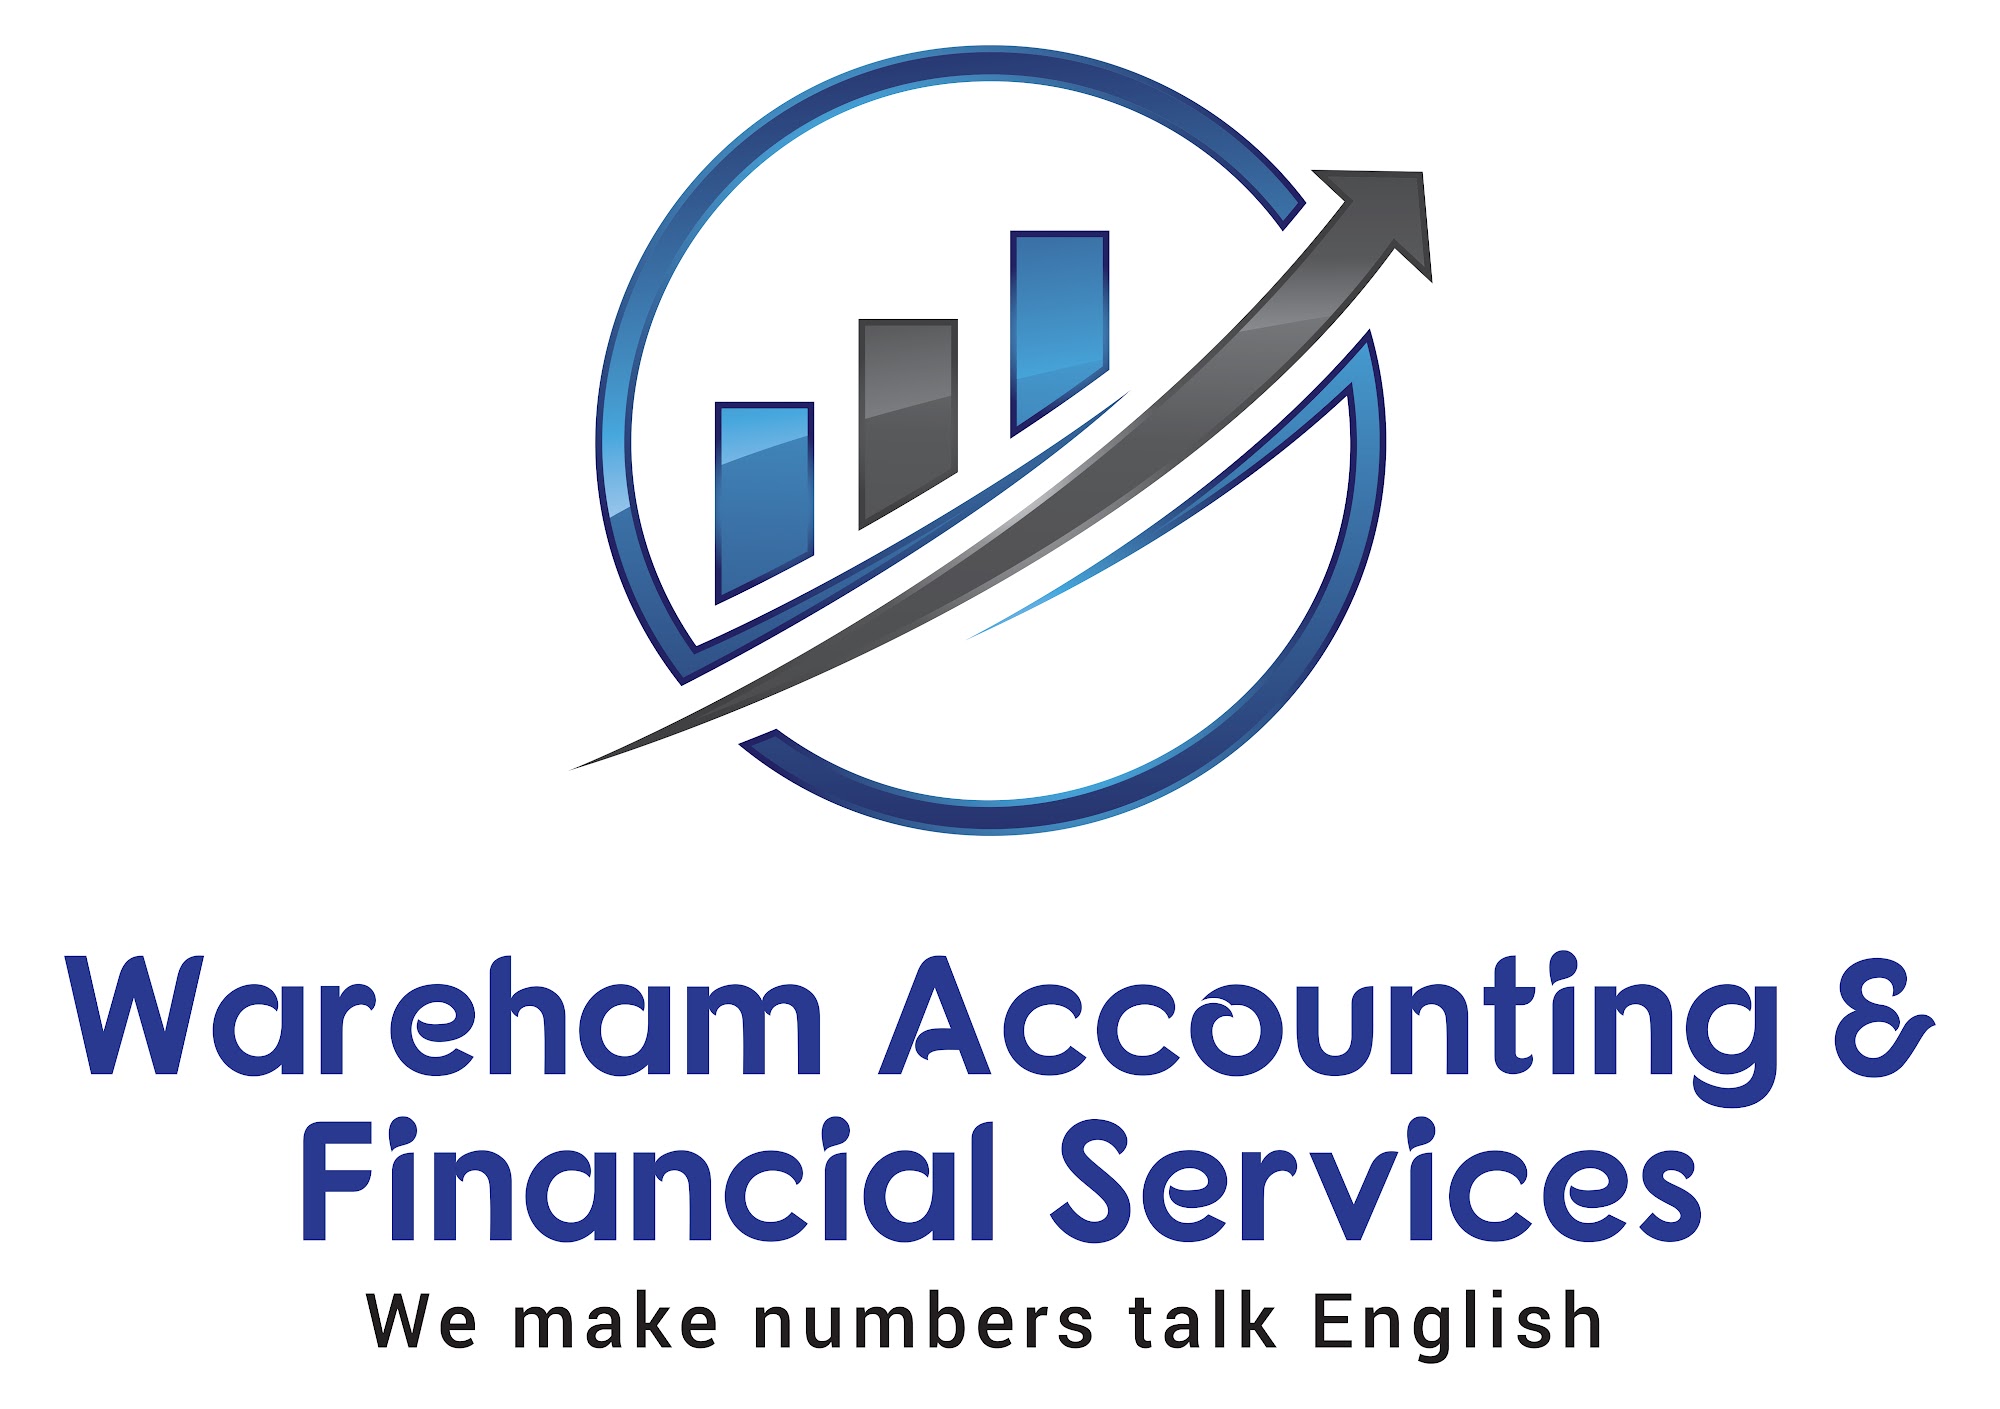 Wareham Accounting & Financial Services